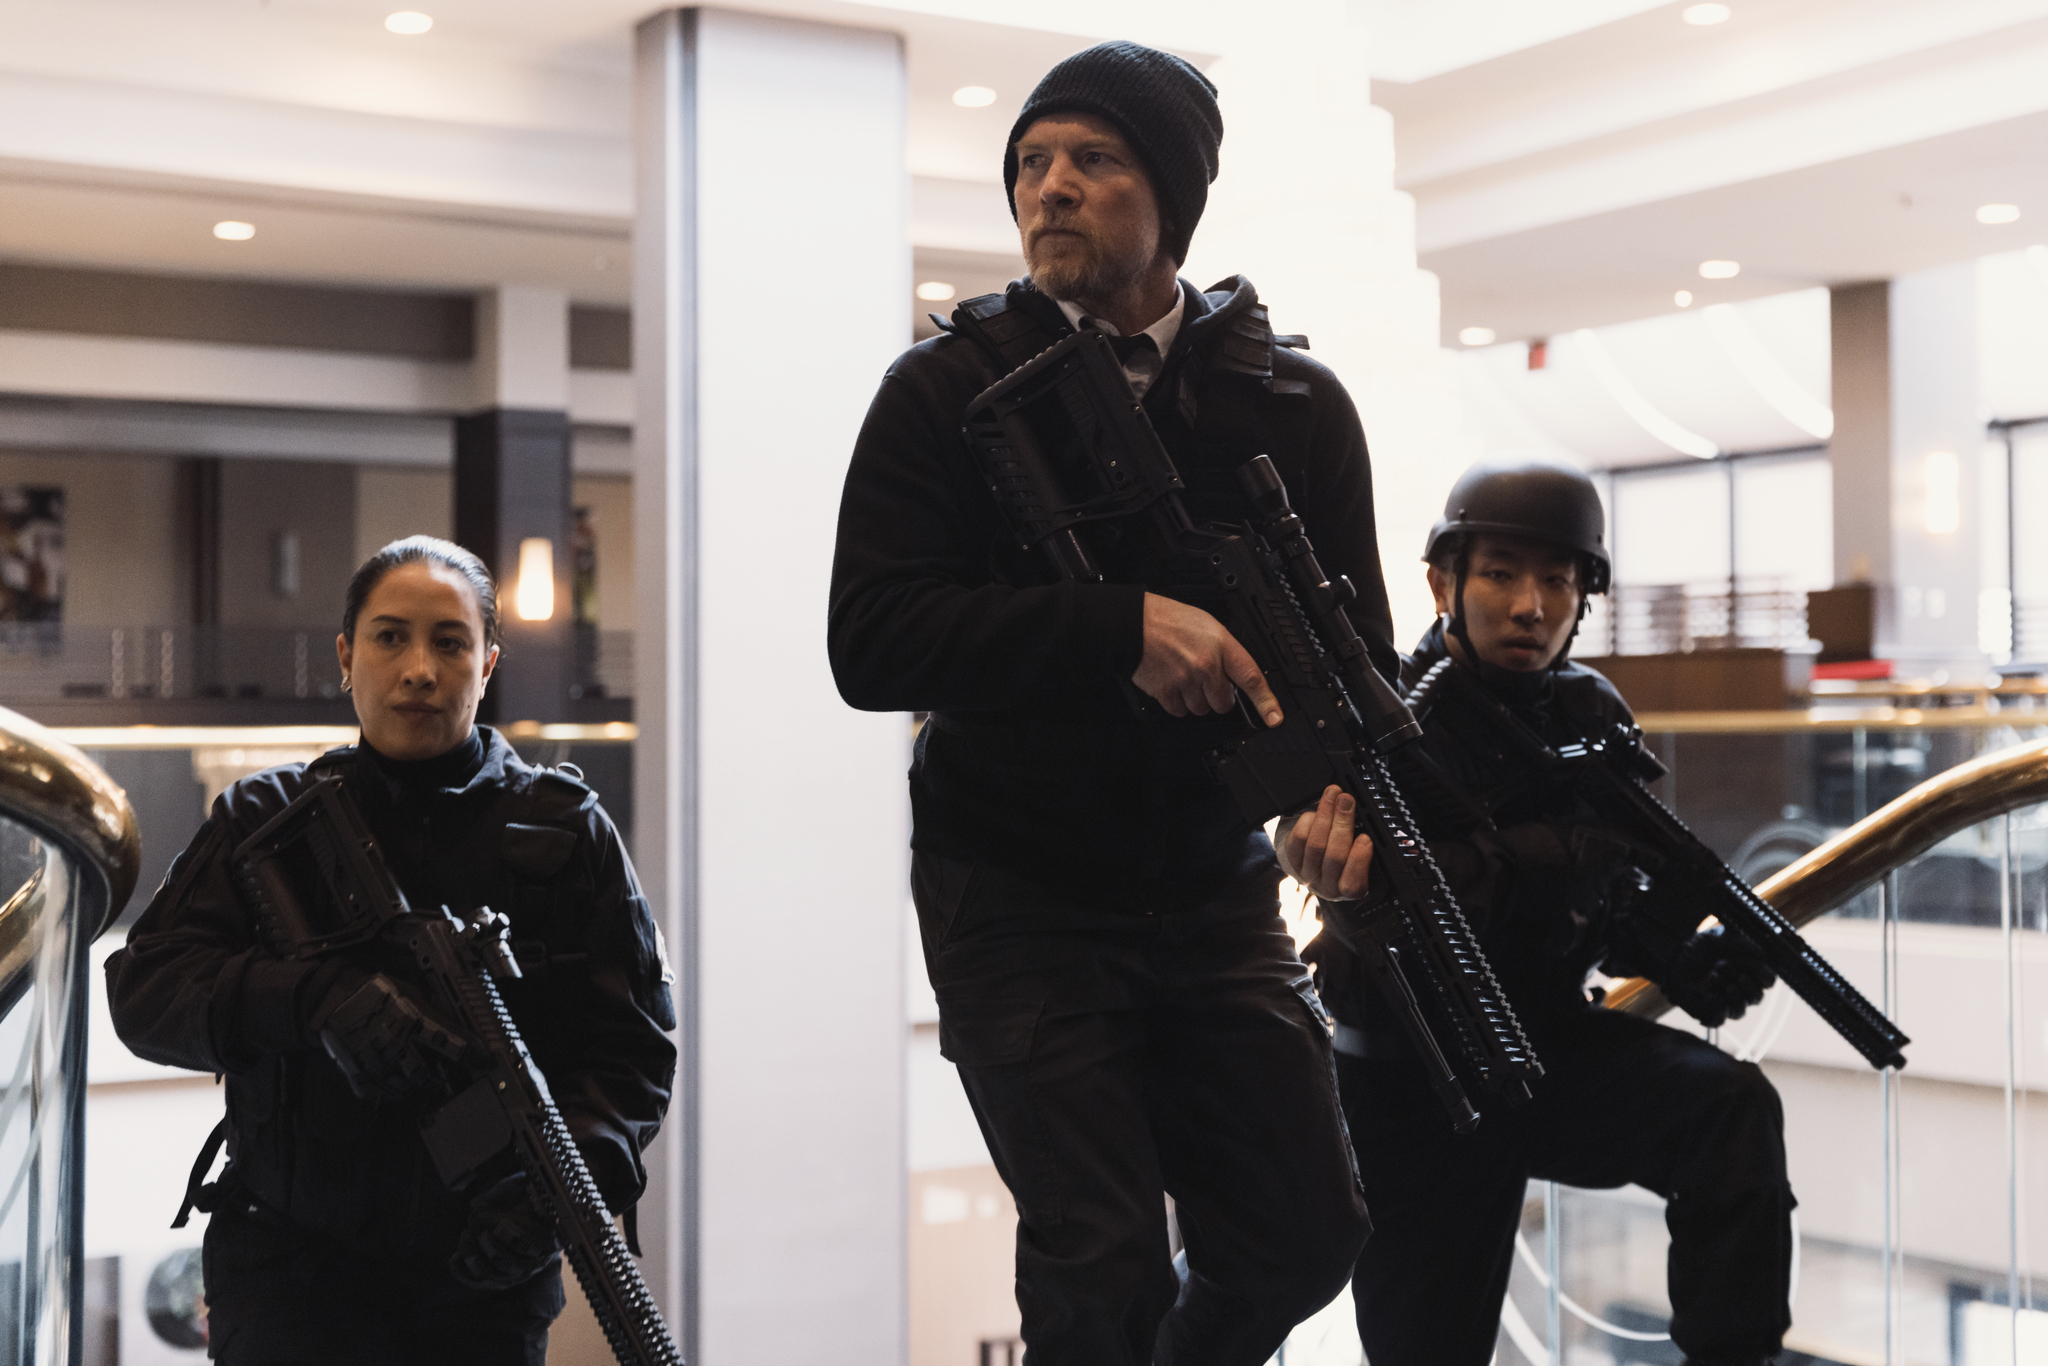 ‘Simulant’ Trailer: Sam Worthington Hunts Android Robbie Amell In New Sci-Fi Thriller